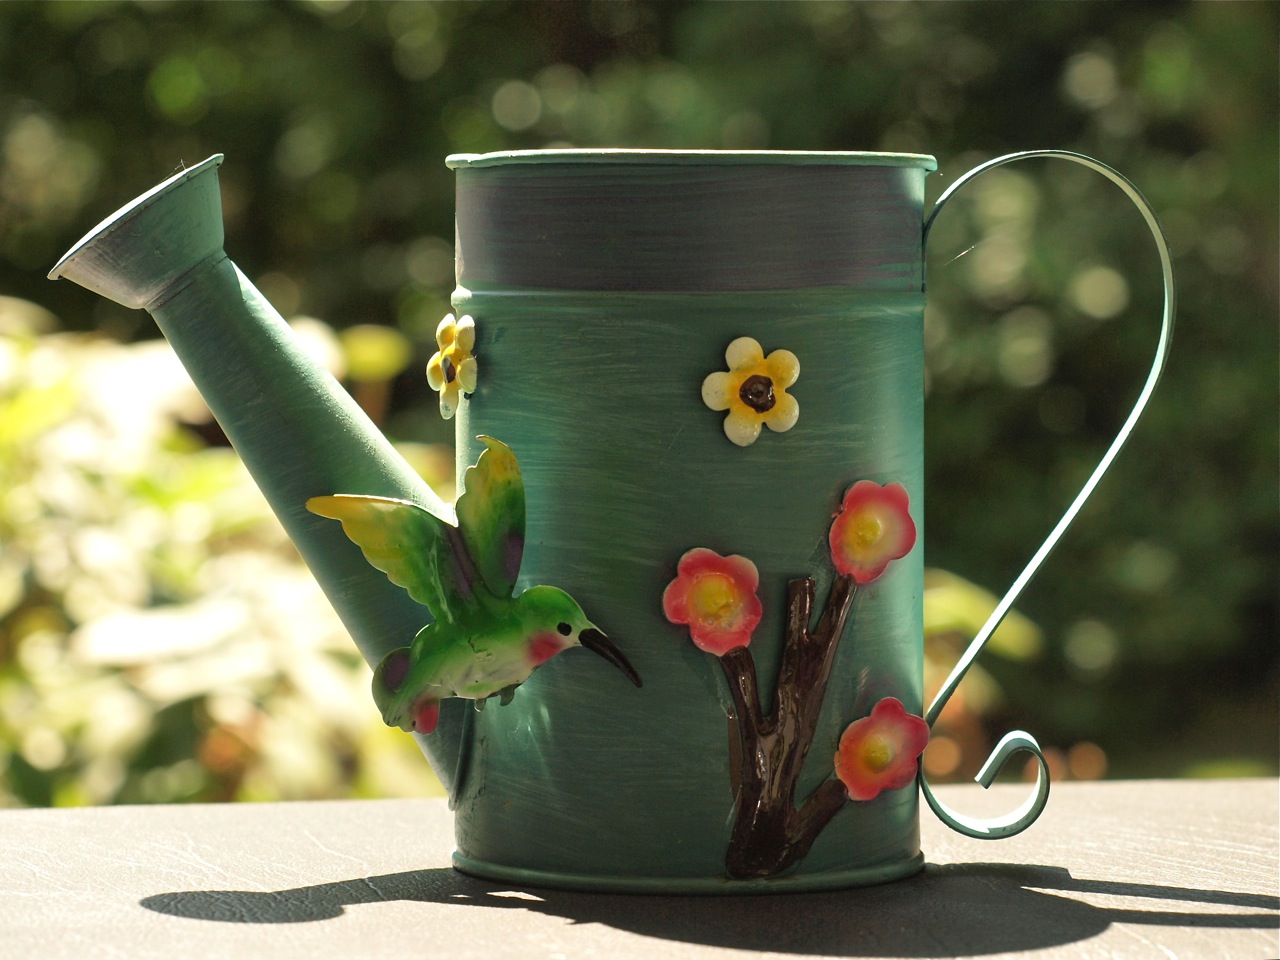 Mickeys Non-Functioning Watering Can